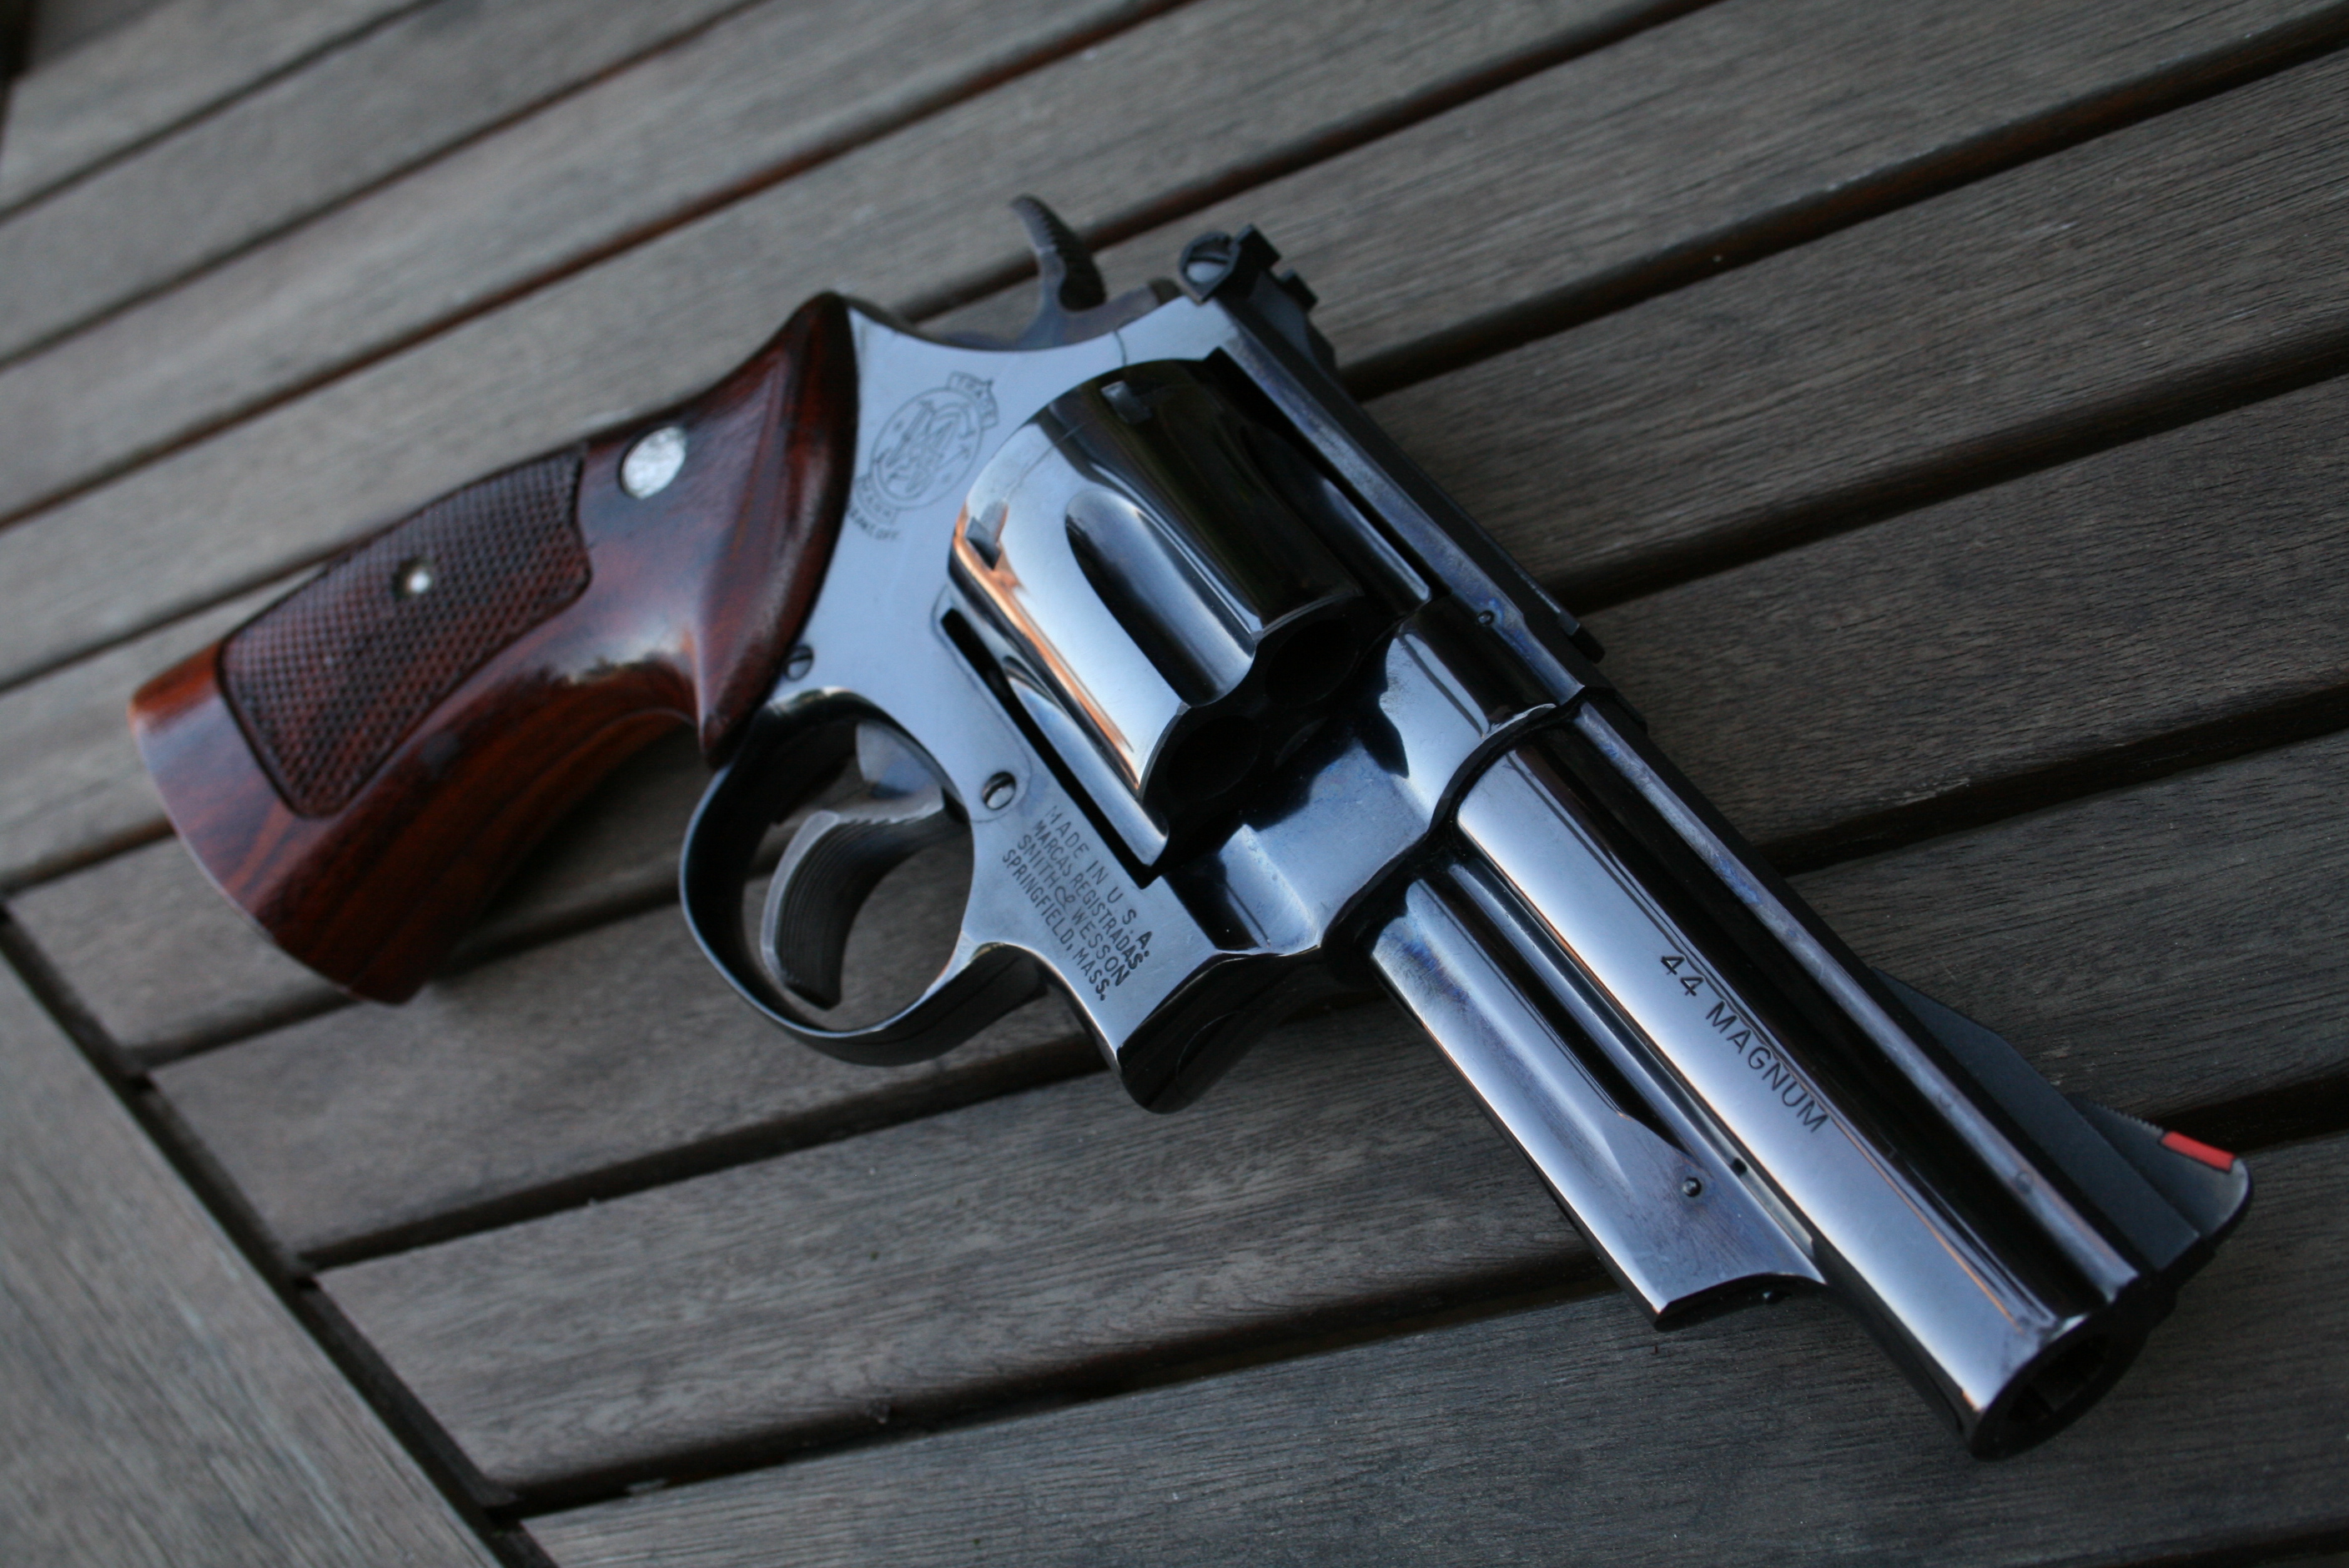 pistols, guns, Clint Eastwood, revolvers, weapons, Smith and Wesson - desktop wallpaper